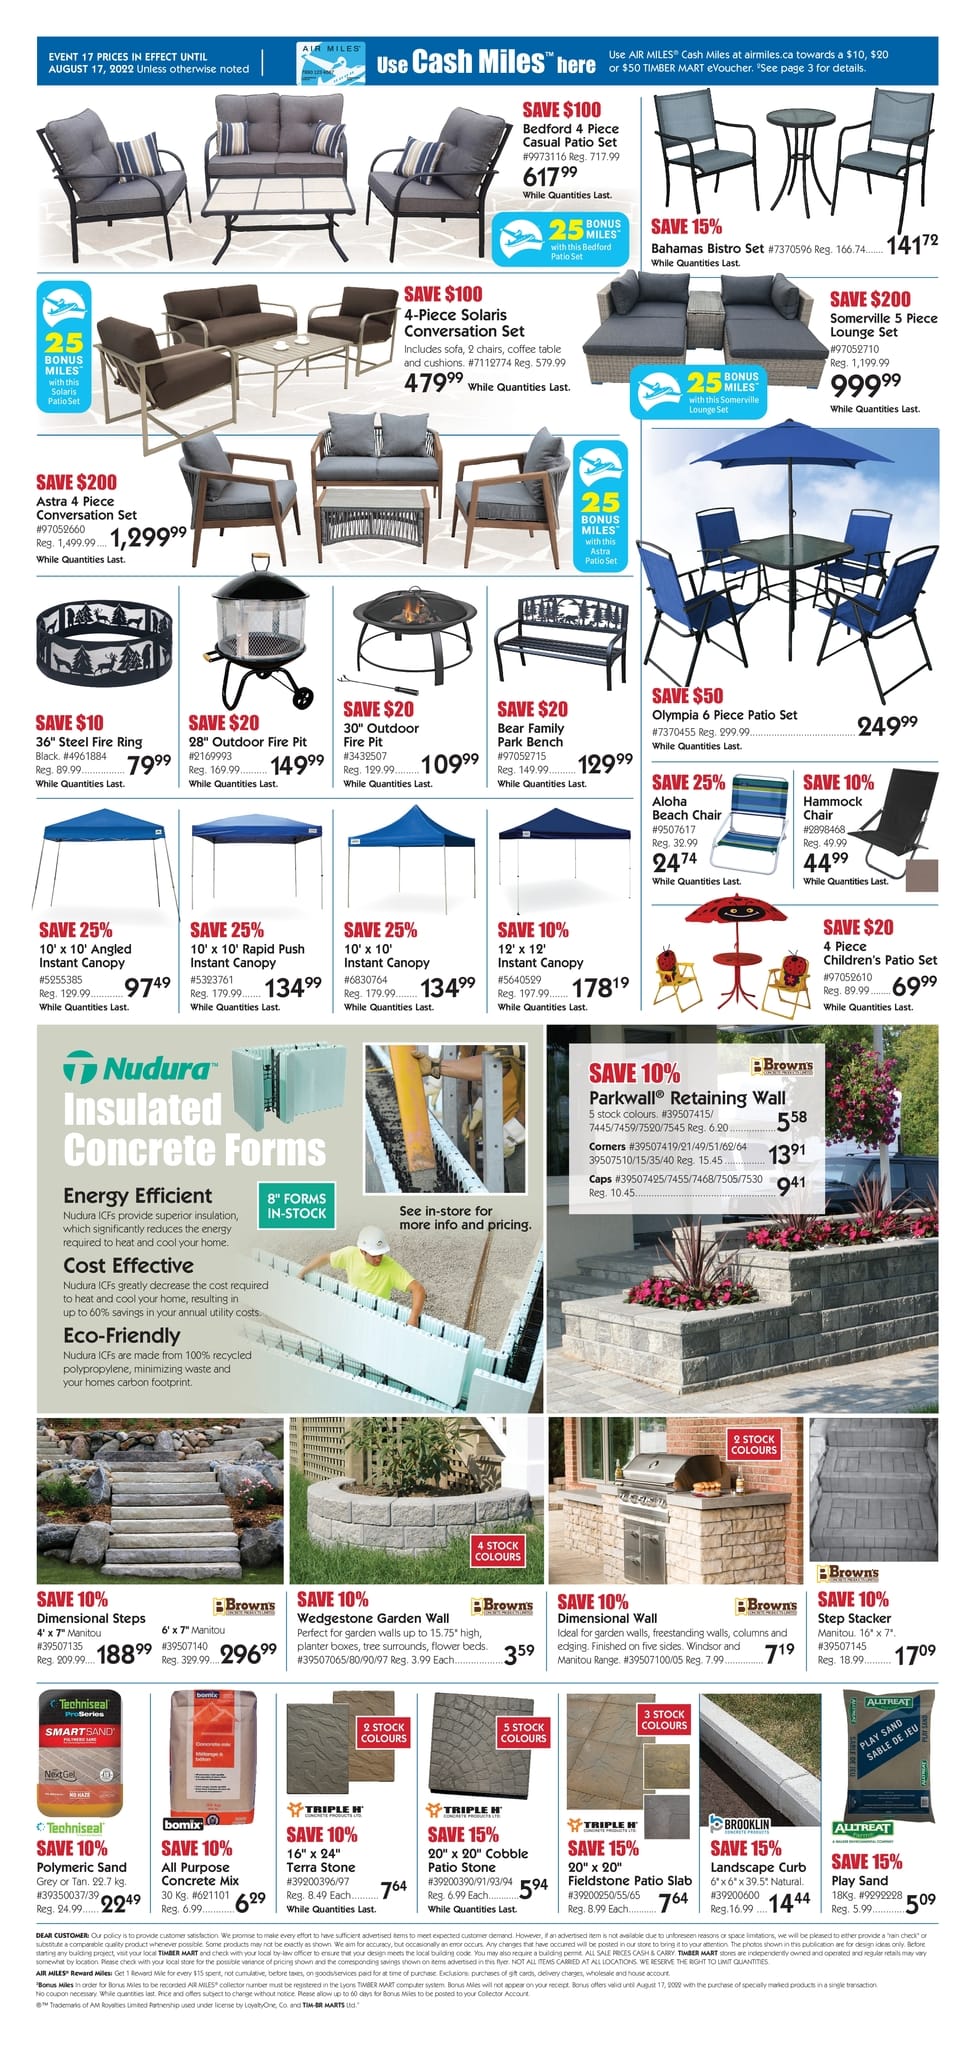 Timber Mart - Weekly Flyer Specials - Page 2